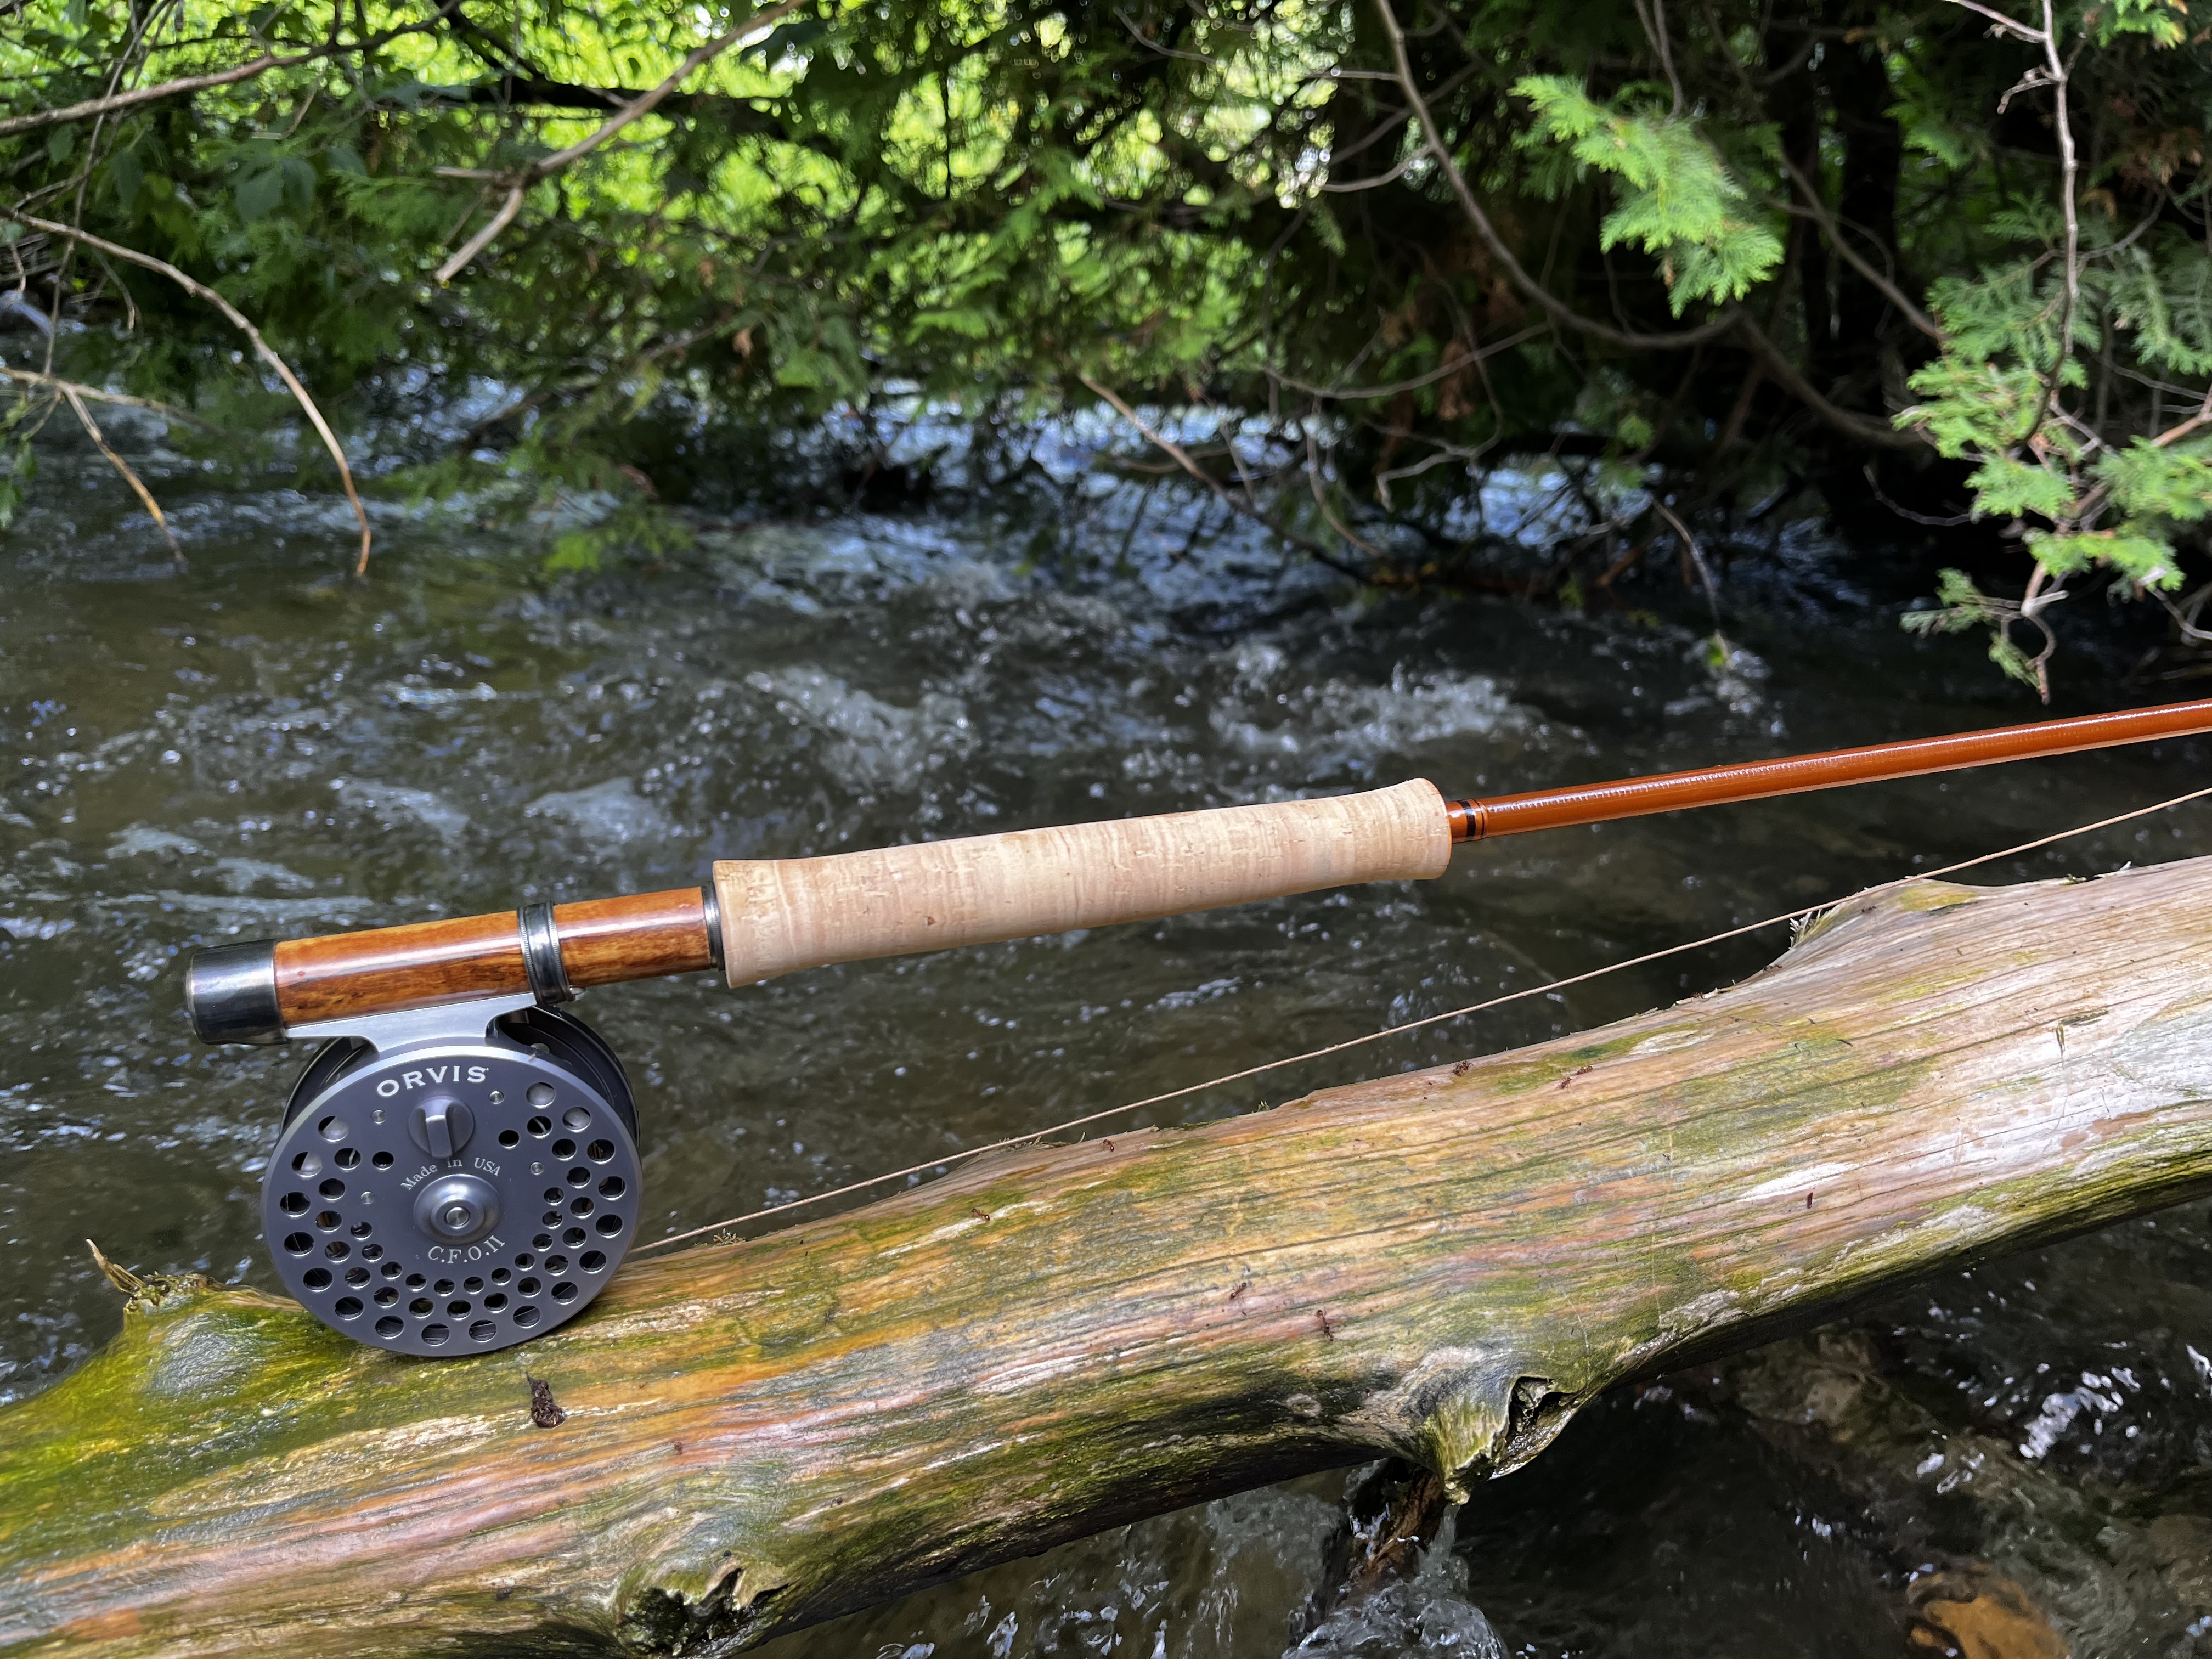 What Rod Would you Use For Tiny Fish in Tiny Water?